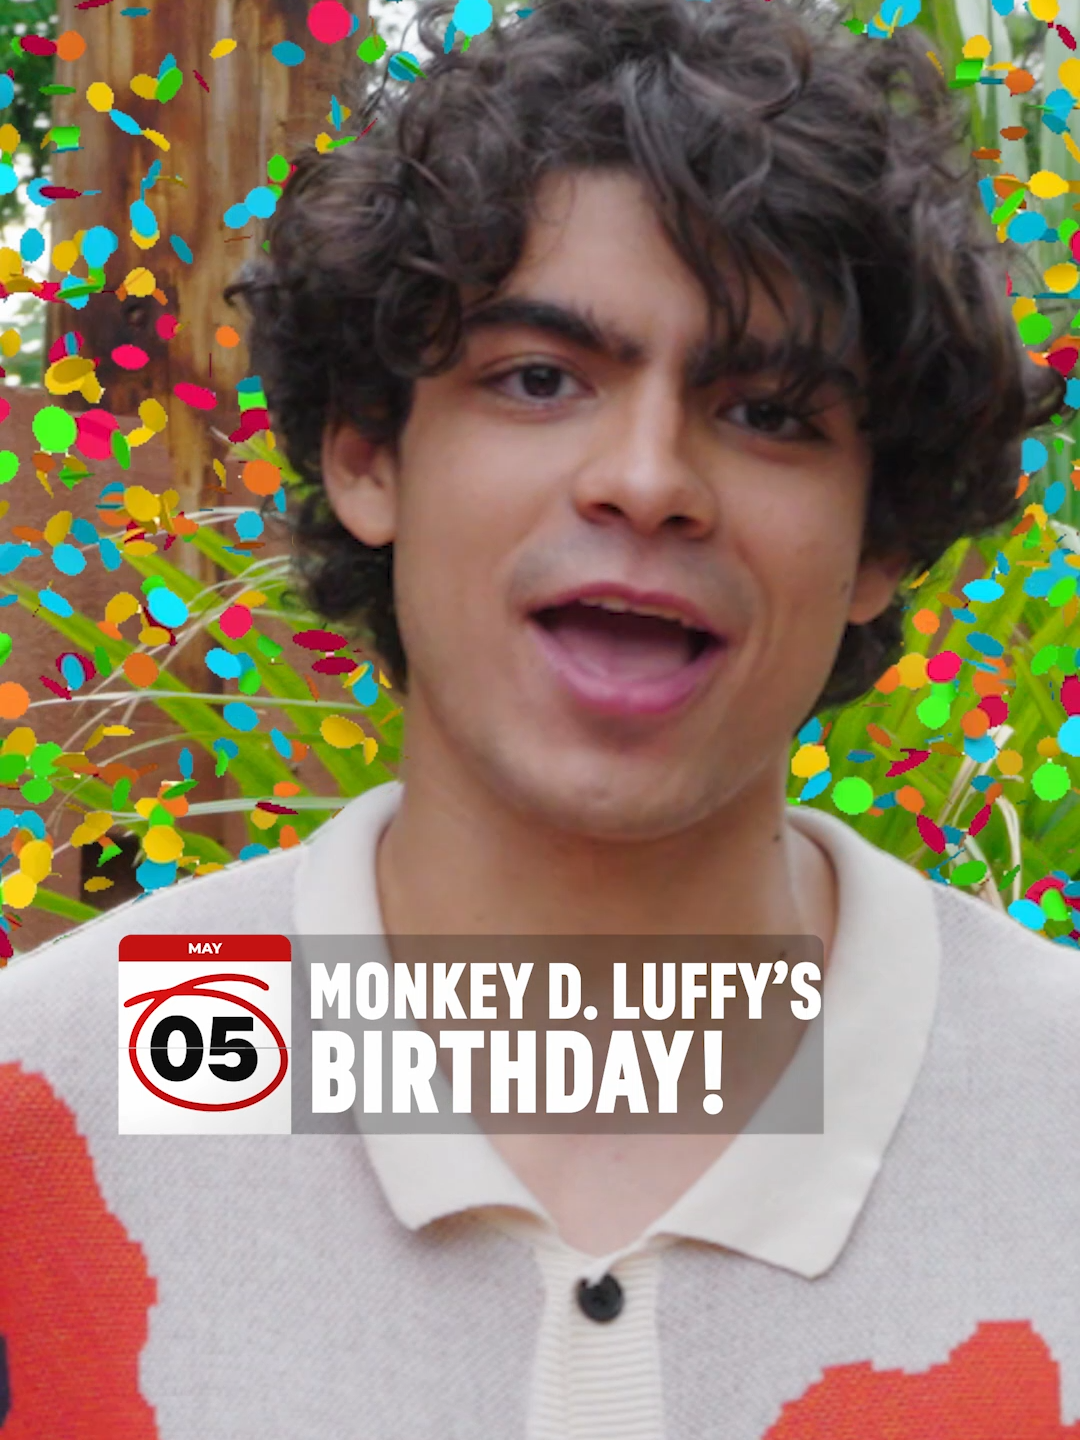 It’s May 5th, NAKAMA! 🎉 Join our captain Iñaki Godoy in celebrating the greatest, coolest, and most inspiring pirate to ever sail the Grand Line. Happy B-B-B-B-Birthday, Monkey D. Luffy! 🌬️🎂